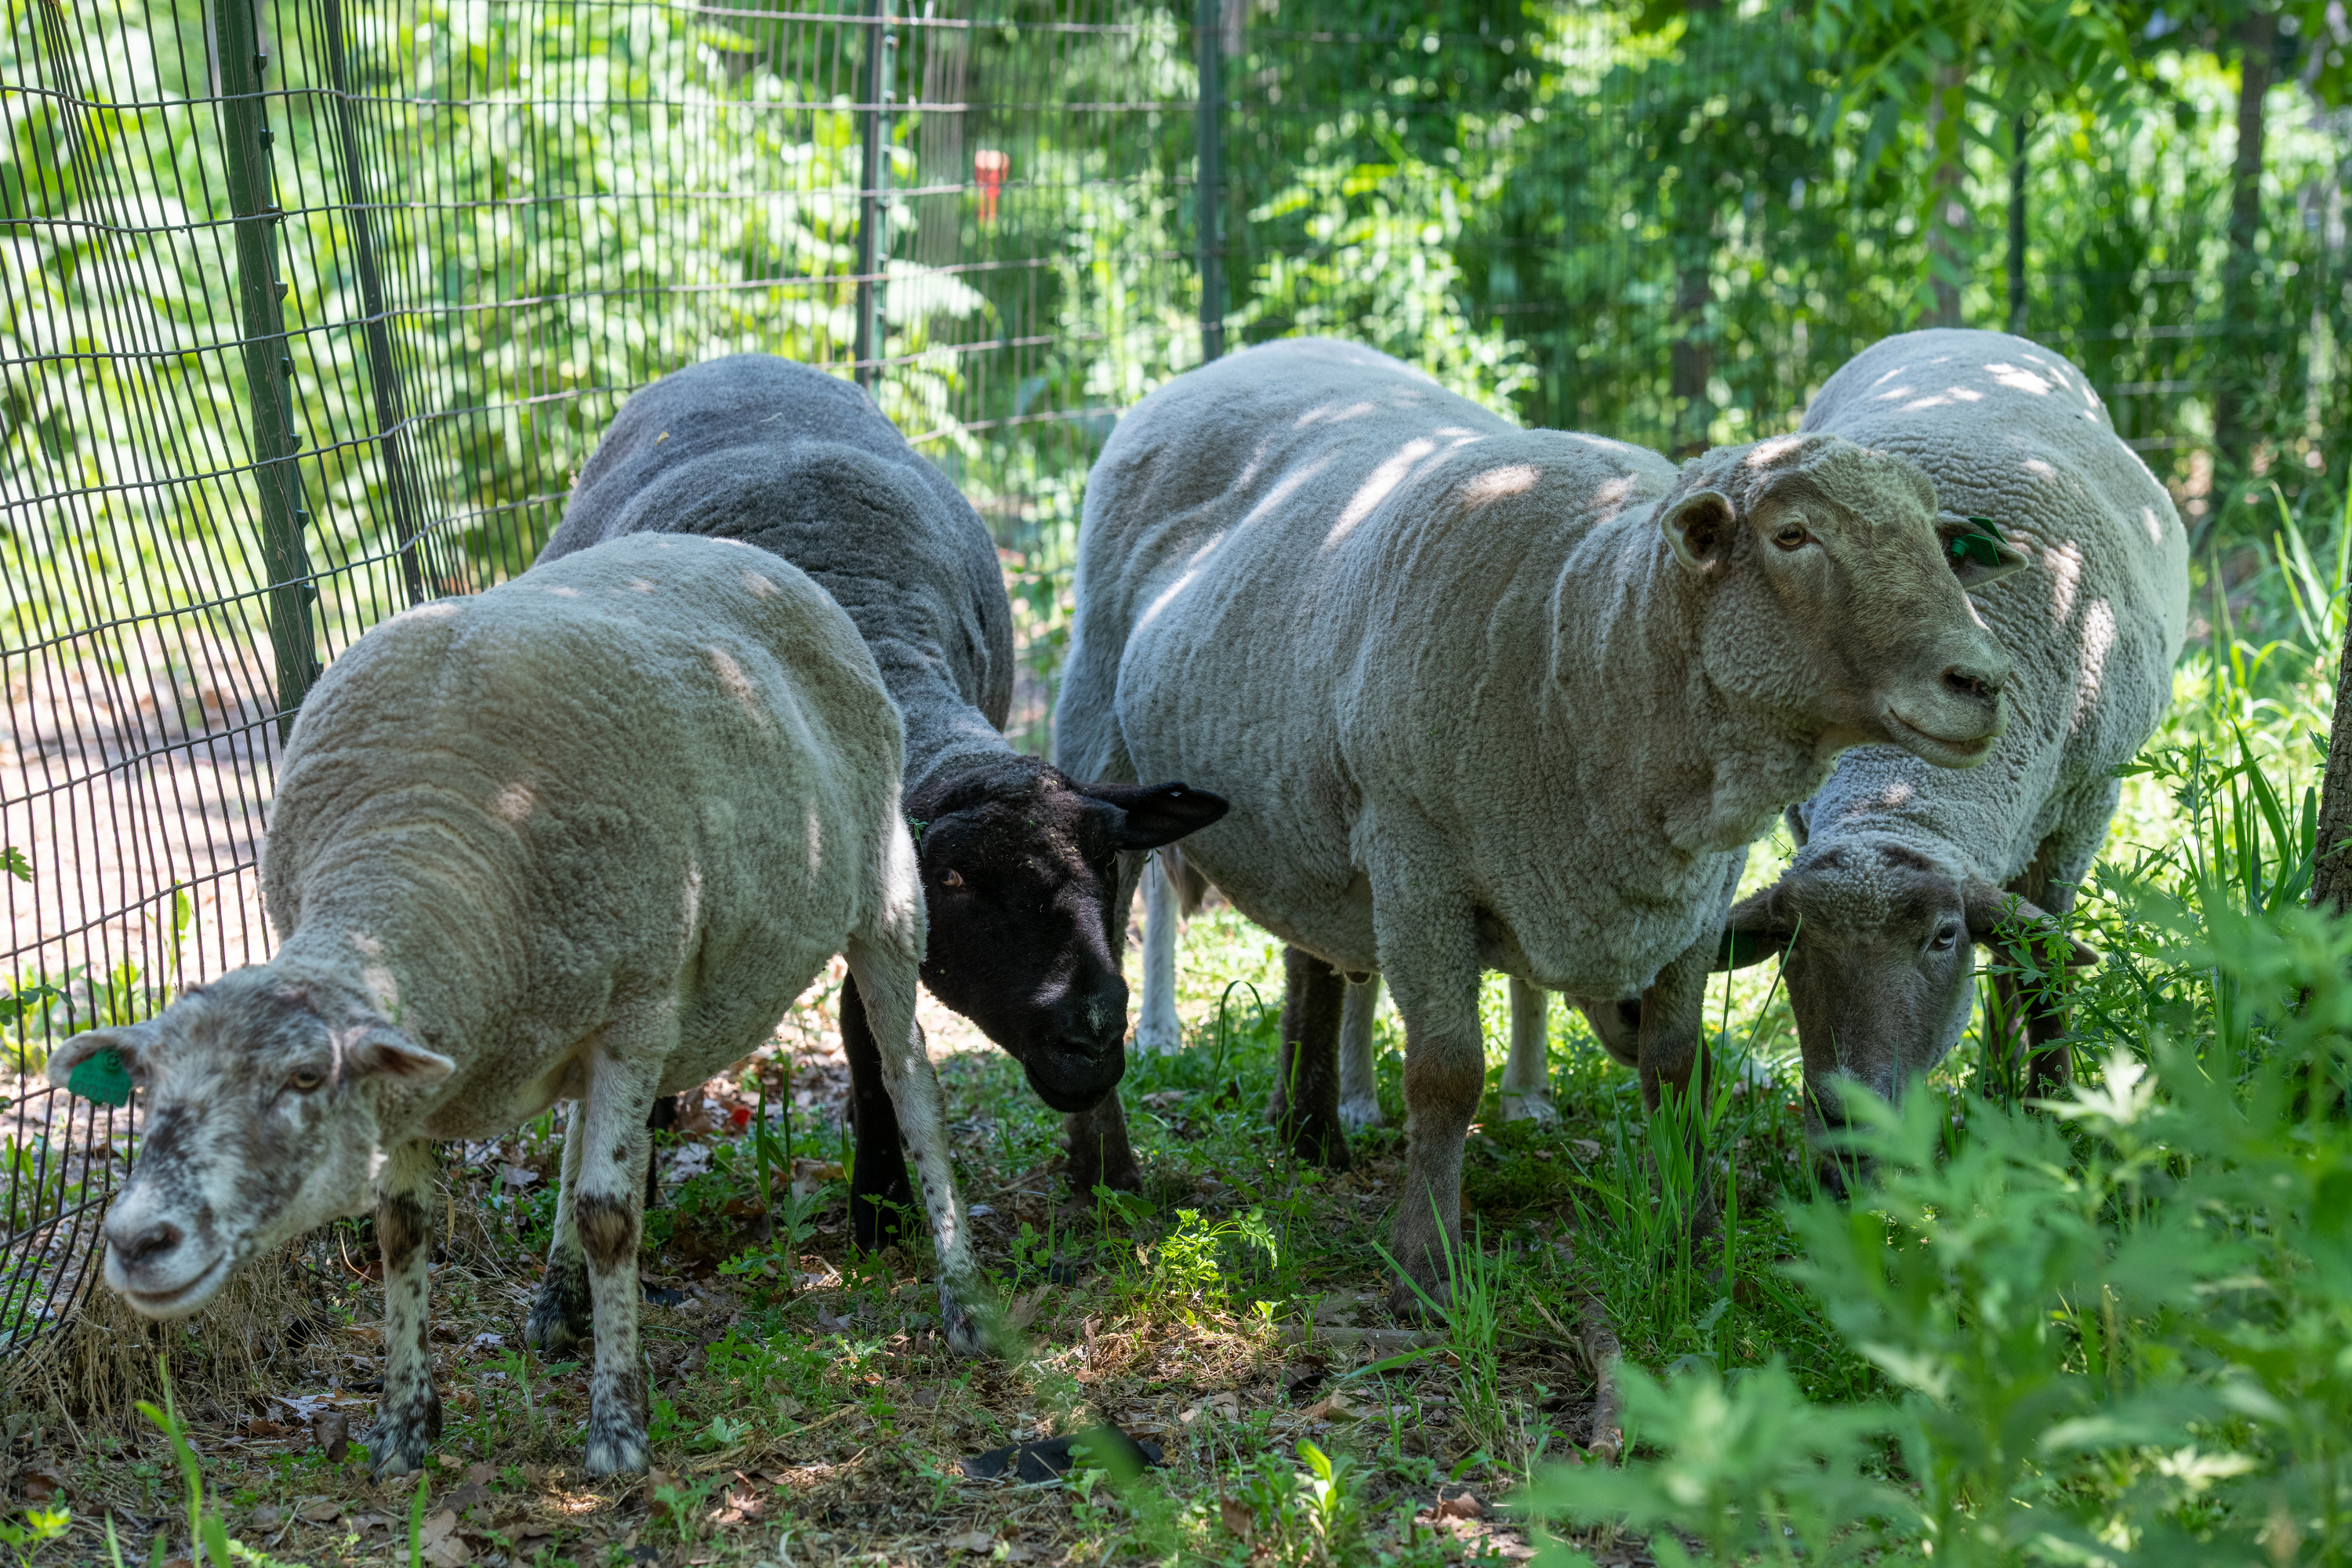 The adorable sheep are back on Governors Island for the season!